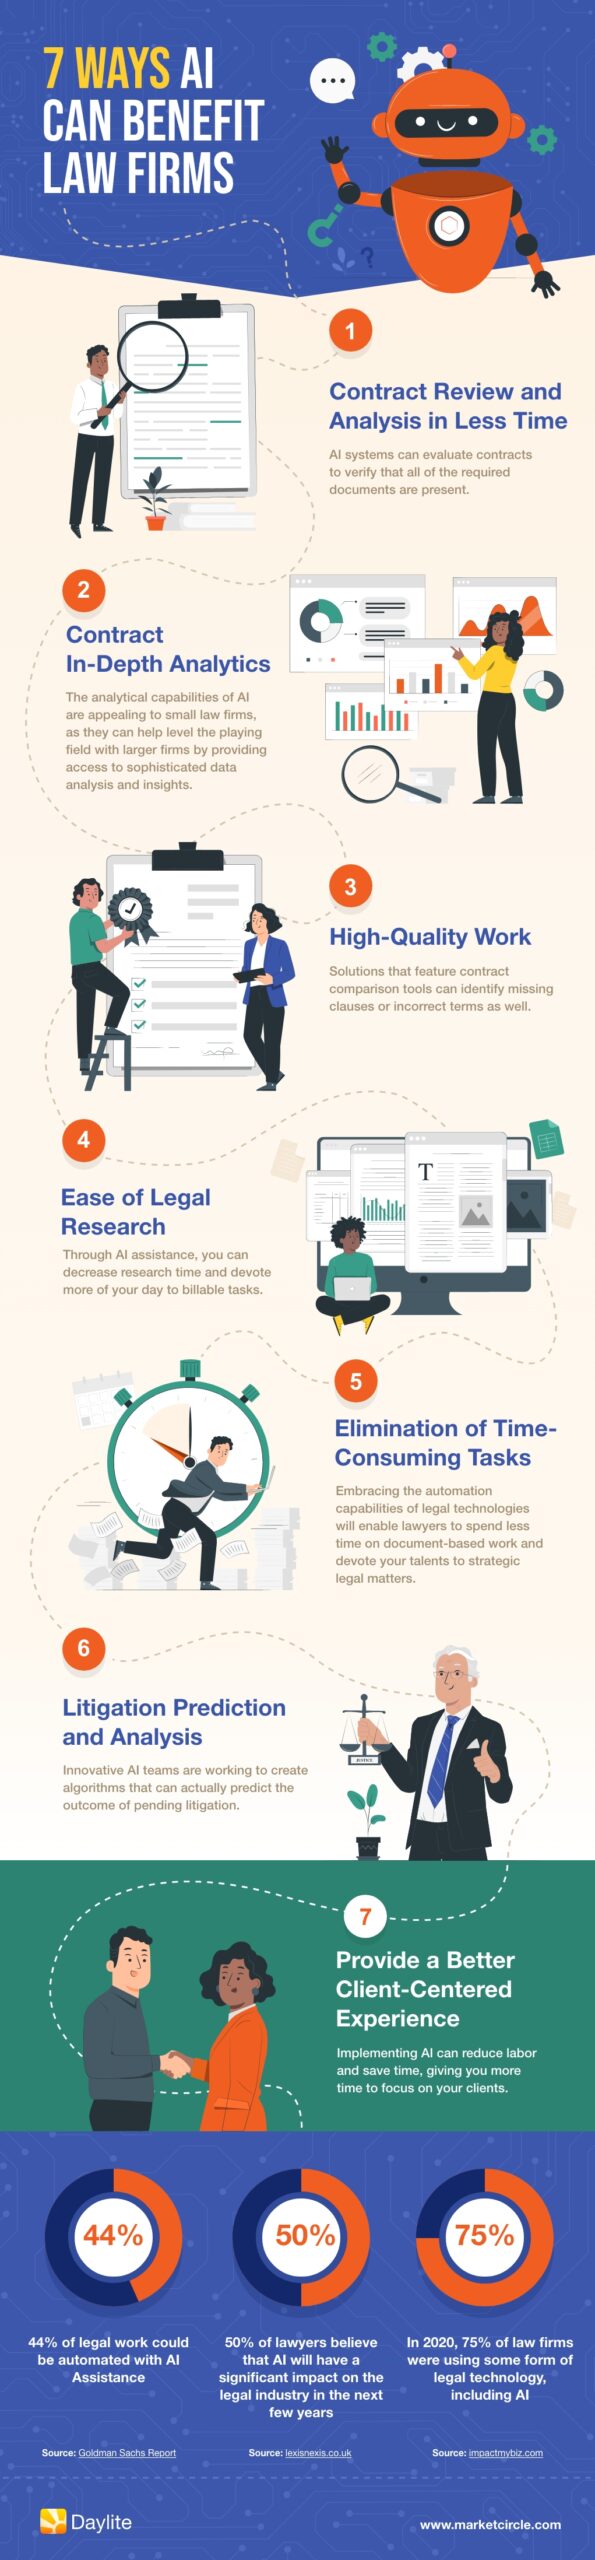 Illustration shows an infographic with the 7 ways AI (artificial intelligence) can benefit law firms